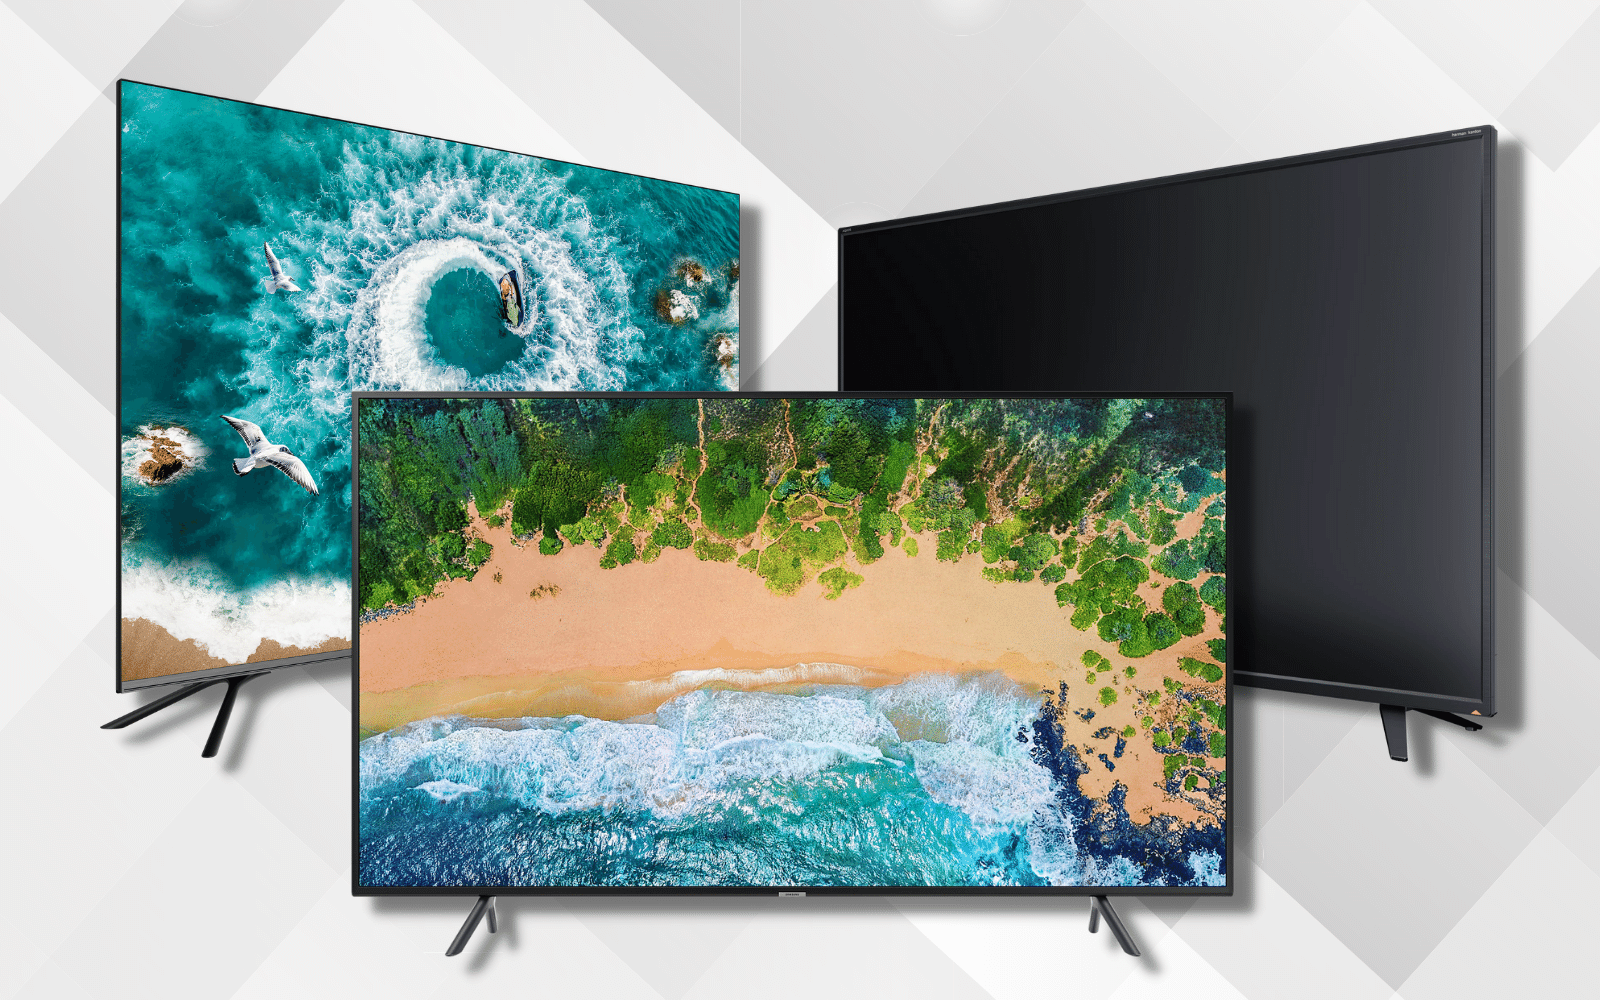 4K Television Buyer's Guide: What to Know Before Buying